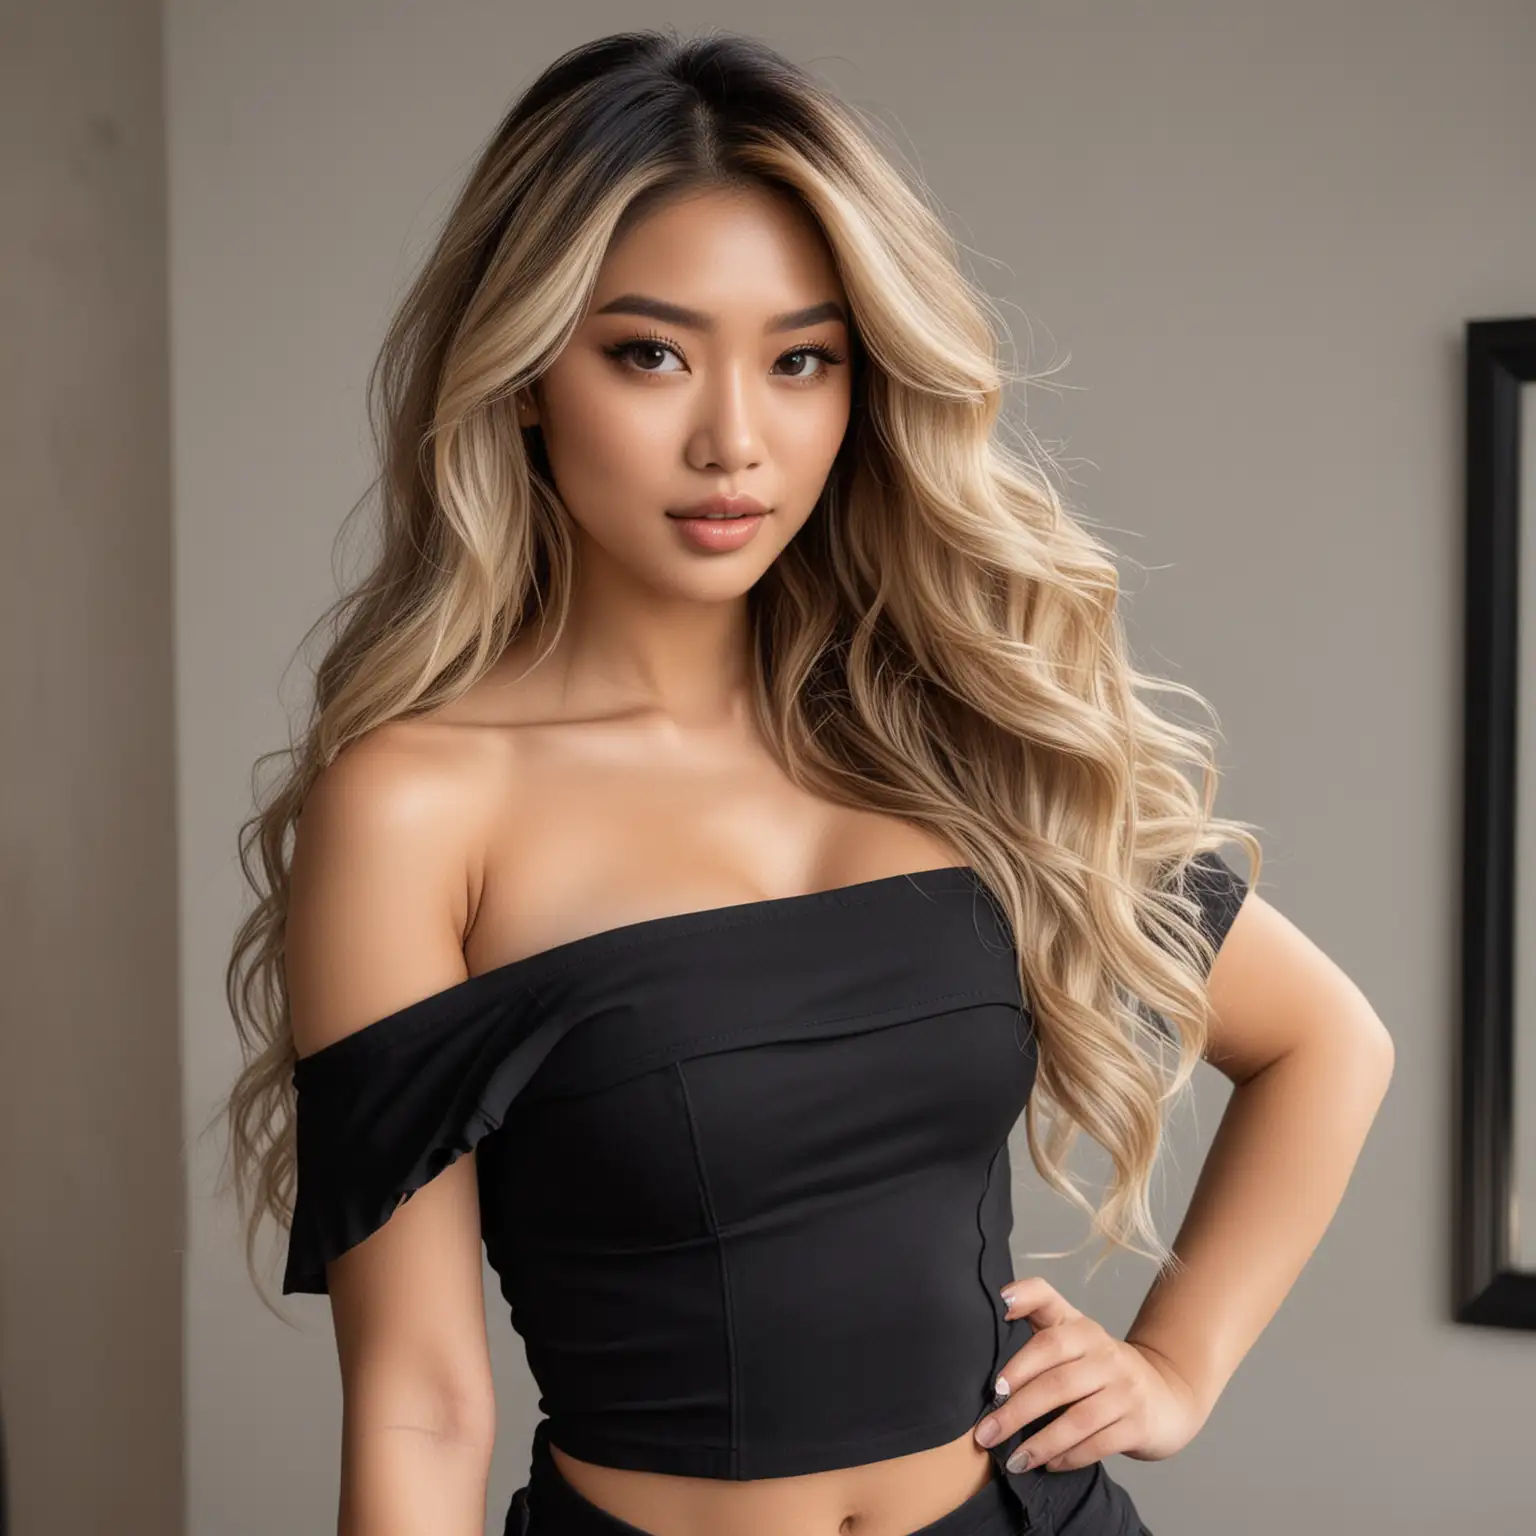 Stylish Asian Model with Long Wavy Blonde Balayage Hair in Black Outfit